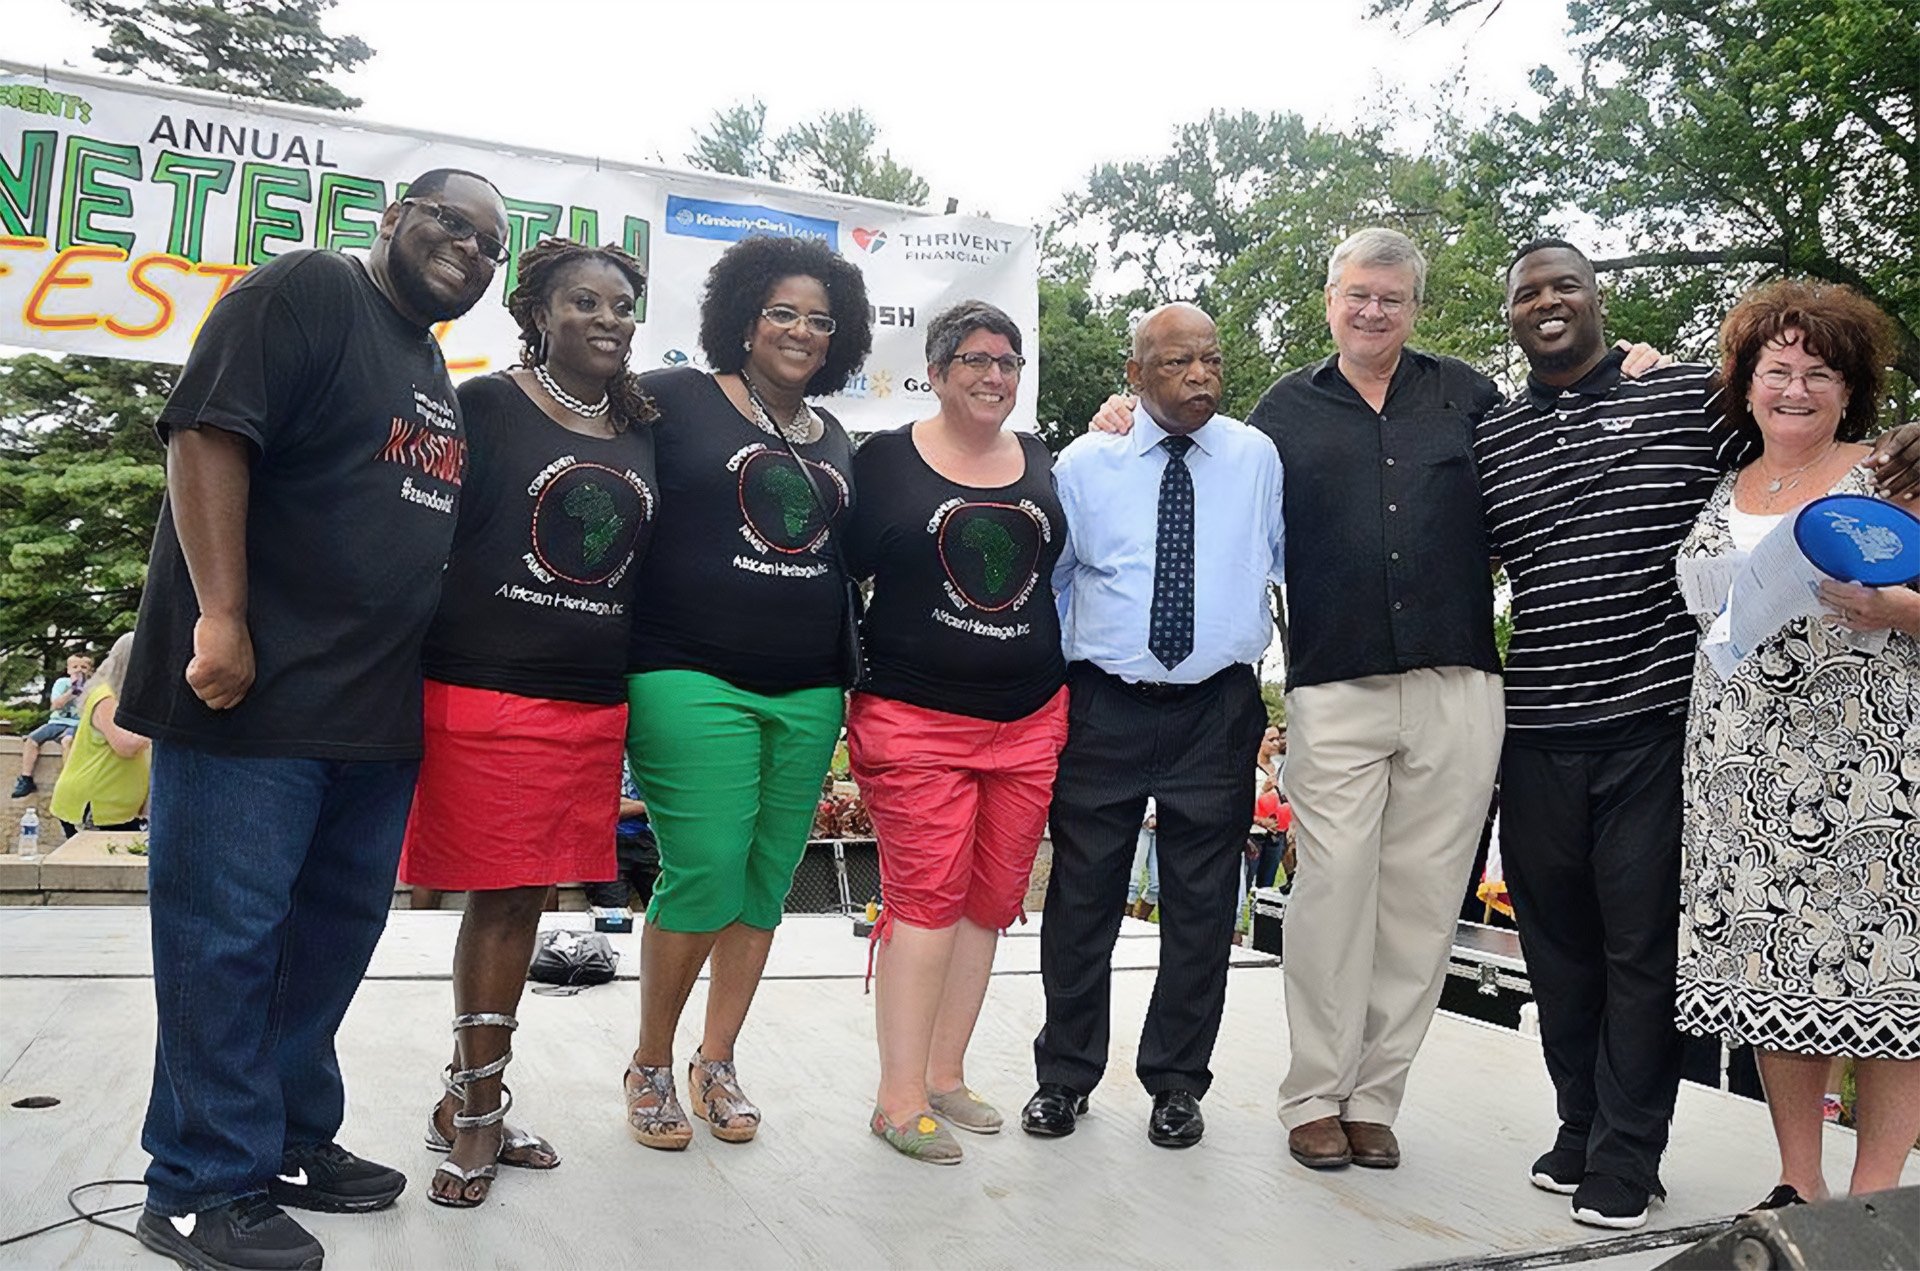 Organized by African Heritage Inc., Appleton's contemporary Juneteenth Festival began in 2010. It has grown to an annual attendance of thousands. John Lewis was featured speaker at the 2018 event.